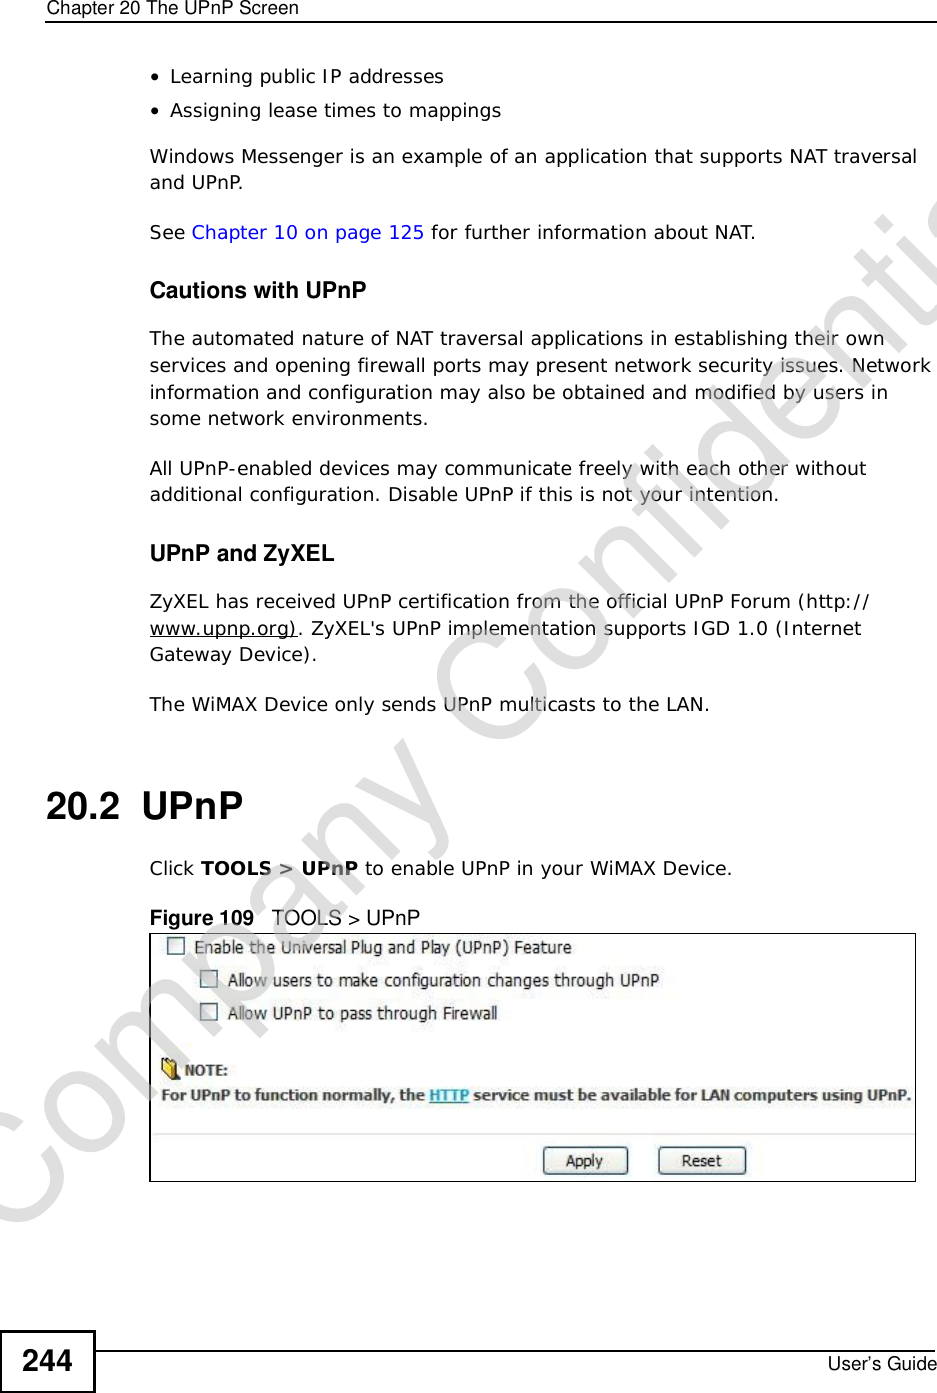 Chapter 20The UPnP ScreenUser’s Guide244•Learning public IP addresses•Assigning lease times to mappingsWindows Messenger is an example of an application that supports NAT traversal and UPnP. See Chapter 10 on page 125 for further information about NAT.Cautions with UPnPThe automated nature of NAT traversal applications in establishing their own services and opening firewall ports may present network security issues. Network information and configuration may also be obtained and modified by users in some network environments. All UPnP-enabled devices may communicate freely with each other without additional configuration. Disable UPnP if this is not your intention. UPnP and ZyXELZyXEL has received UPnP certification from the official UPnP Forum (http://www.upnp.org). ZyXEL&apos;s UPnP implementation supports IGD 1.0 (Internet Gateway Device).The WiMAX Device only sends UPnP multicasts to the LAN.20.2  UPnPClick TOOLS &gt; UPnP to enable UPnP in your WiMAX Device.Figure 109   TOOLS &gt; UPnPCompany Confidential